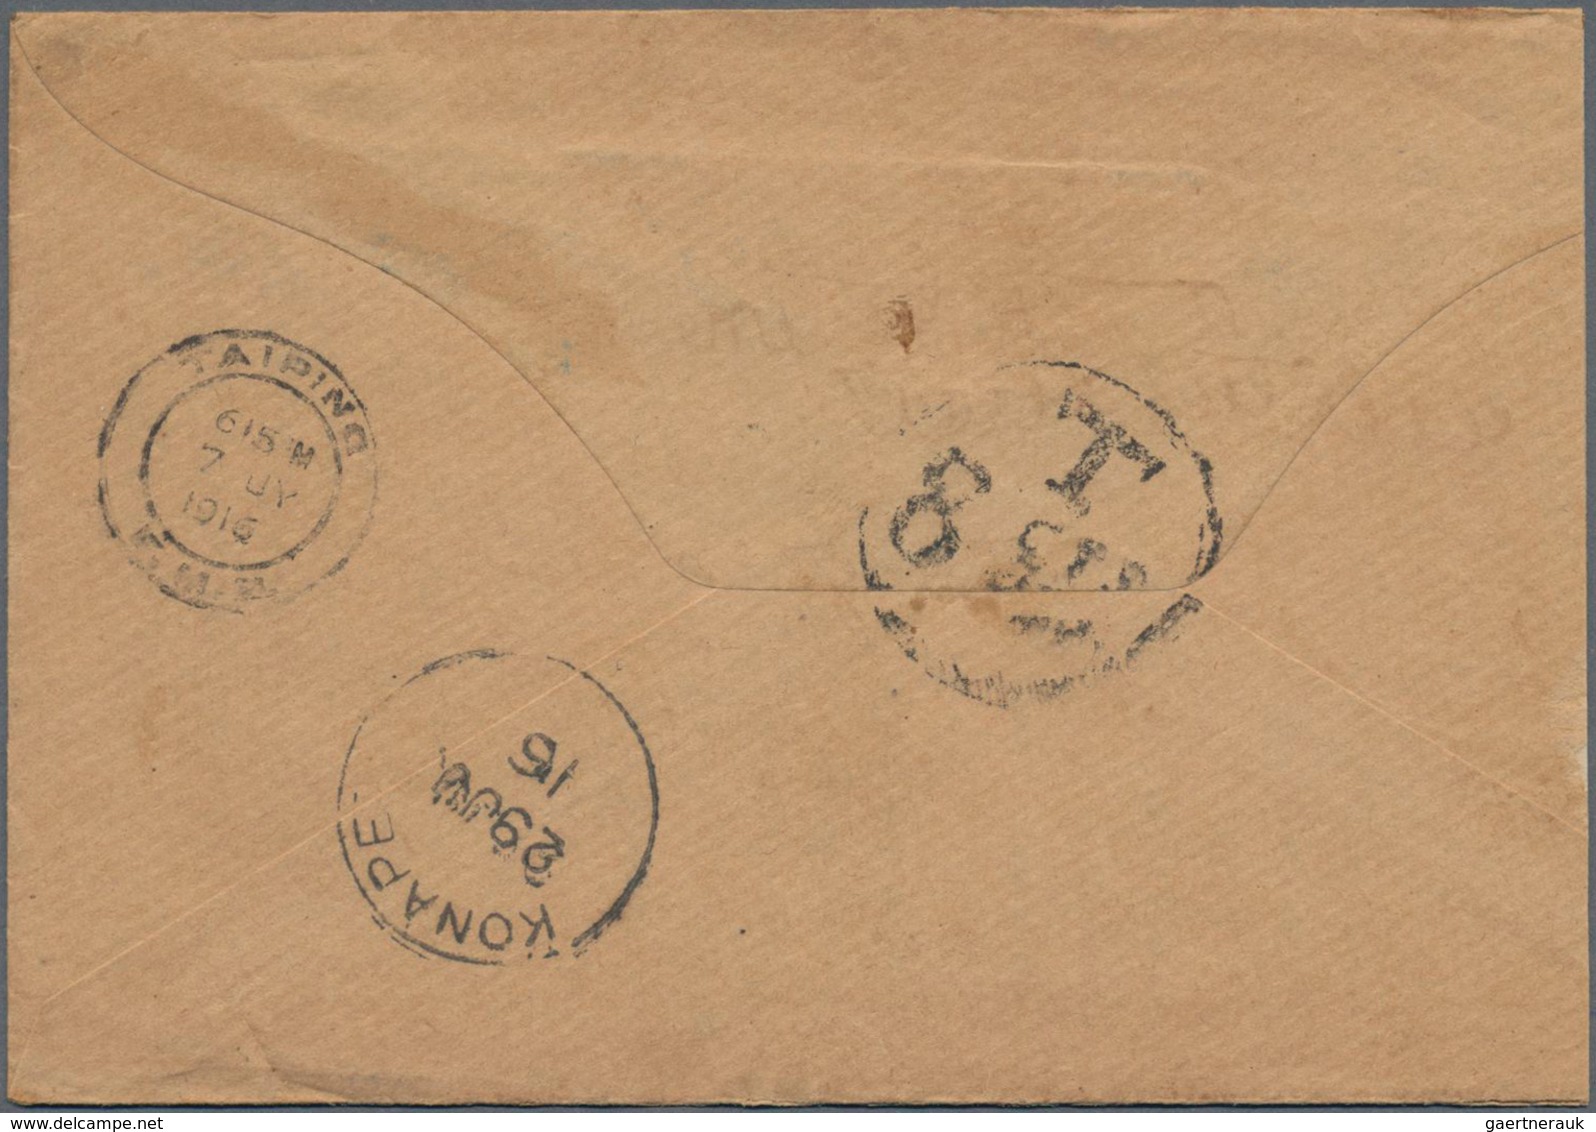 Malaiische Staaten: 1900's-1930's: Some more than 200 insufficiently franked covers and postal stati